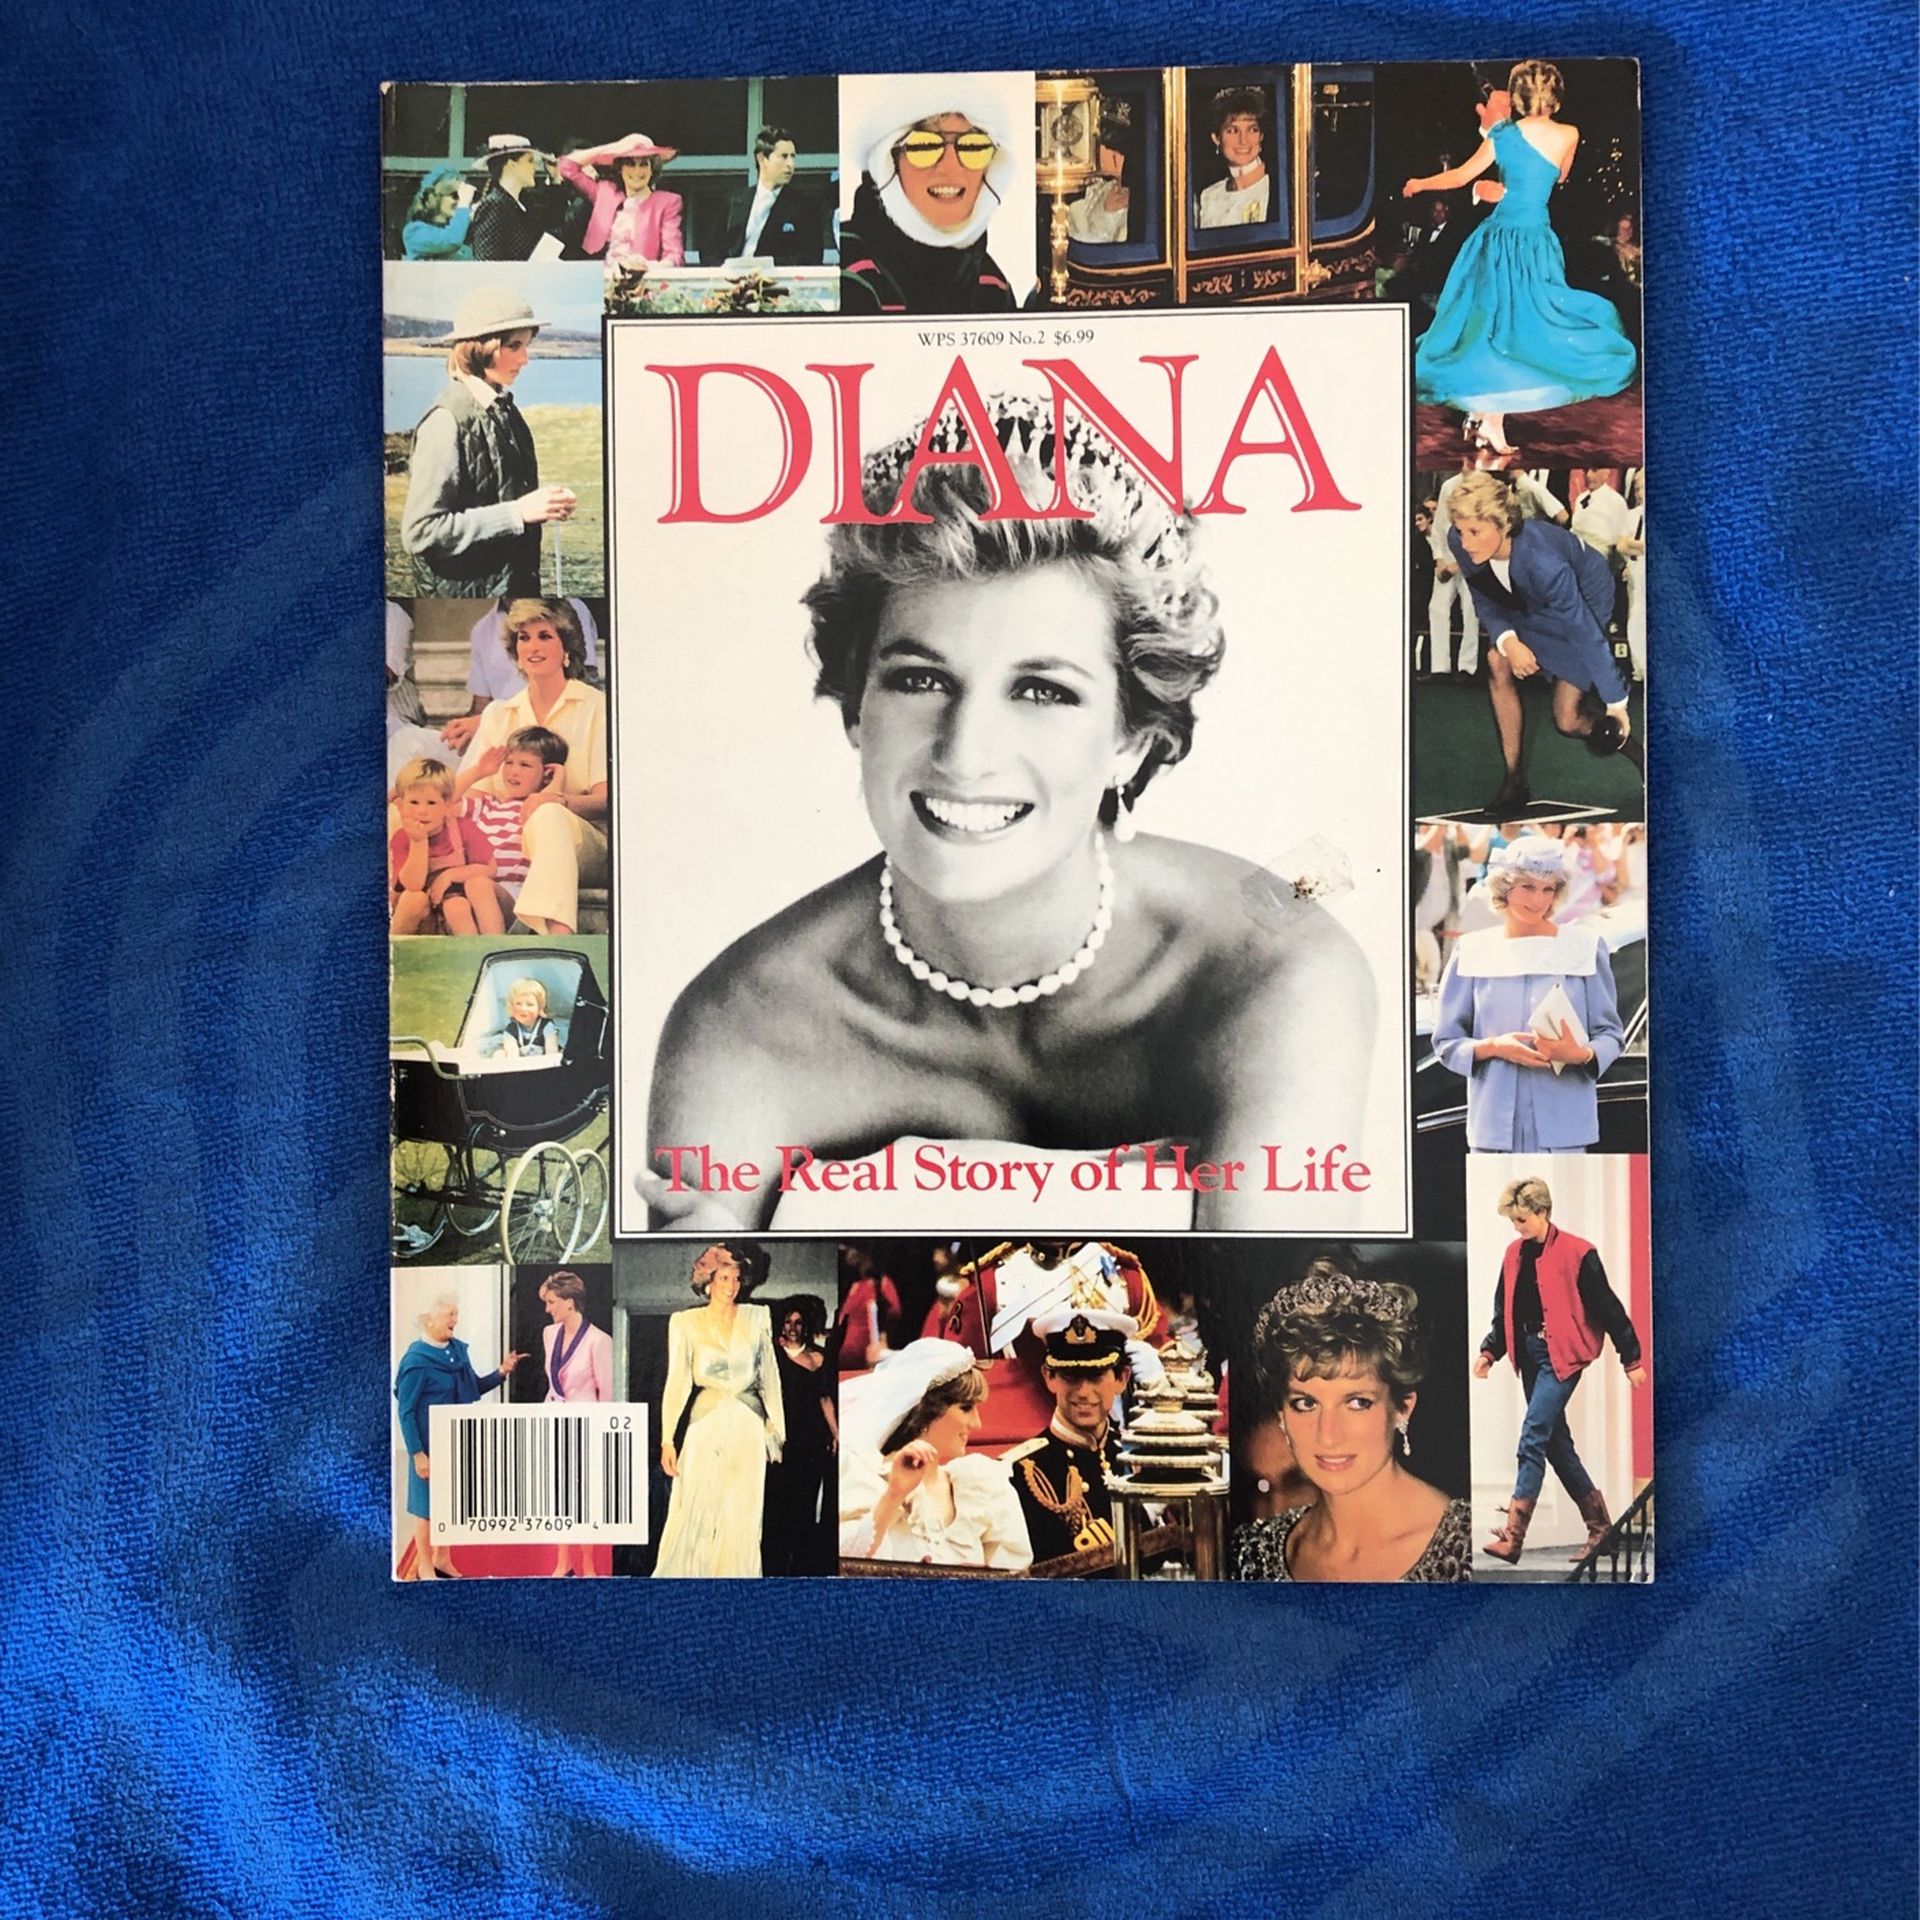 Diana the real story of her life